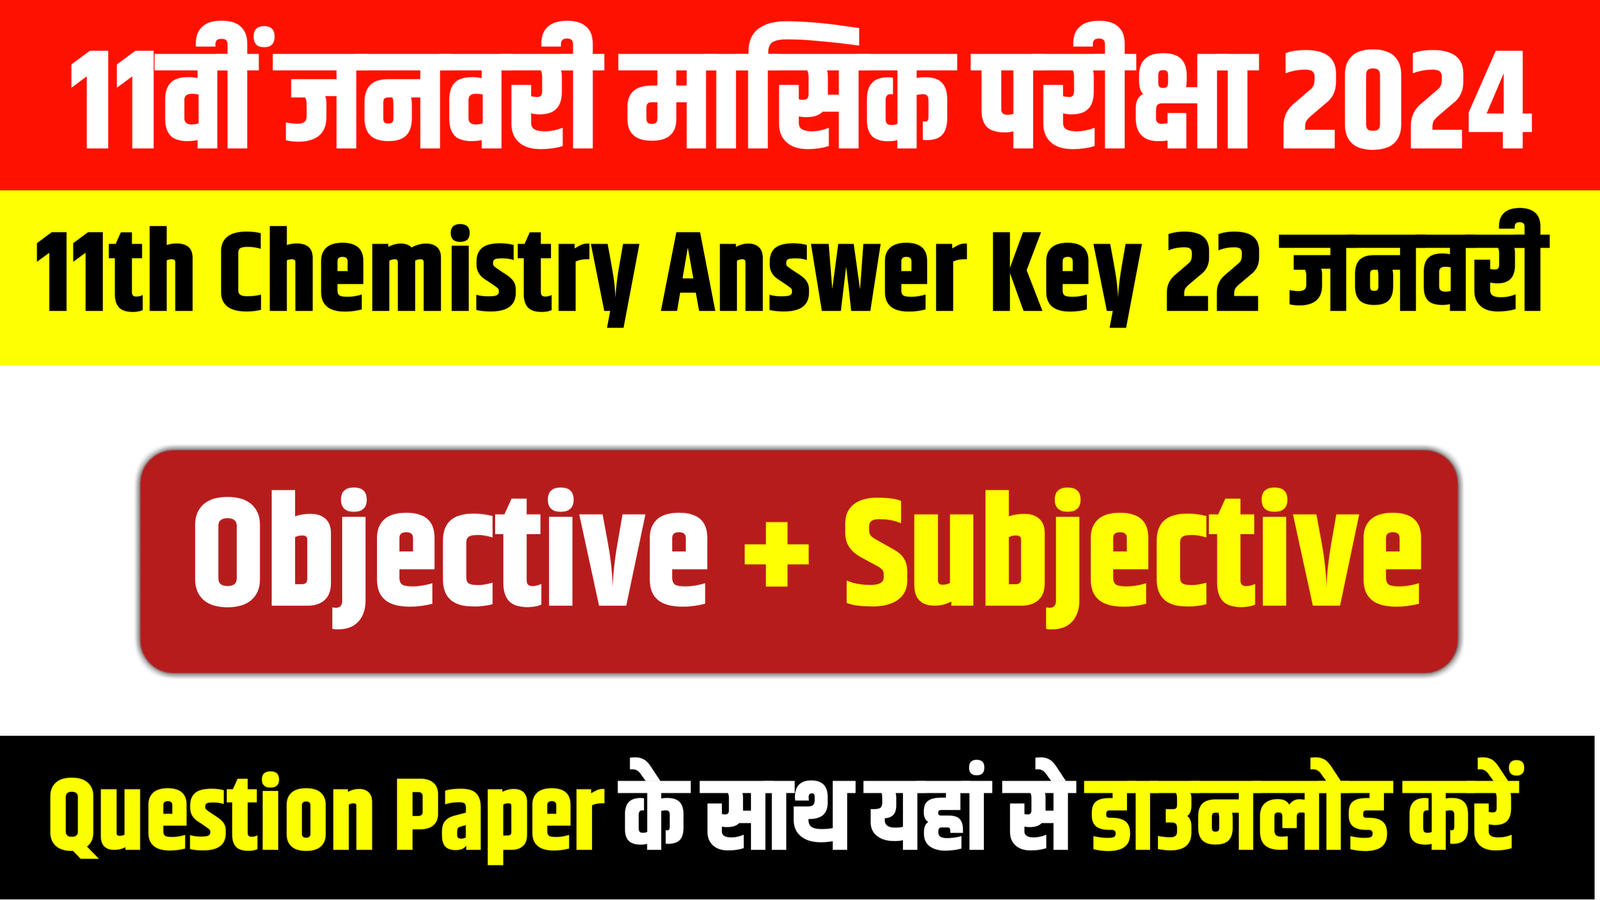 Bihar Board 11th Chemistry Answer key 2024: 11th Chemistry Objective Subjective Question Paper 11th Monthly Exam January 2024